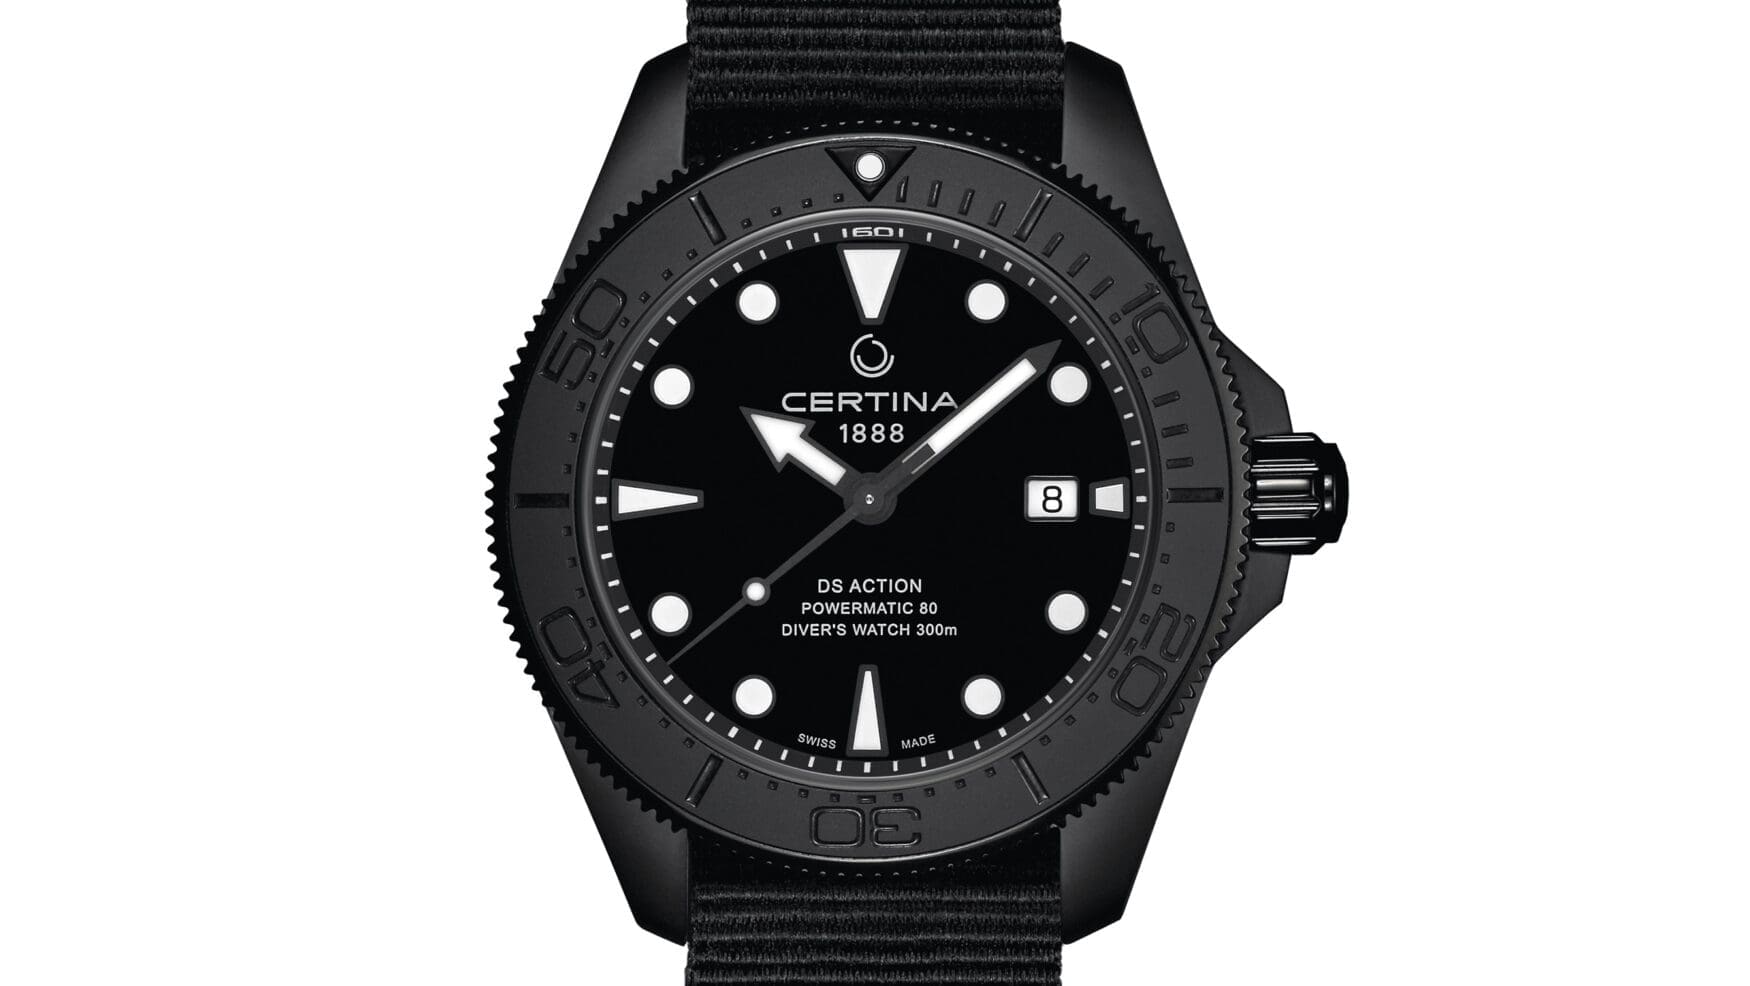 The Certina DS Action Diver takes a trip to the darkside